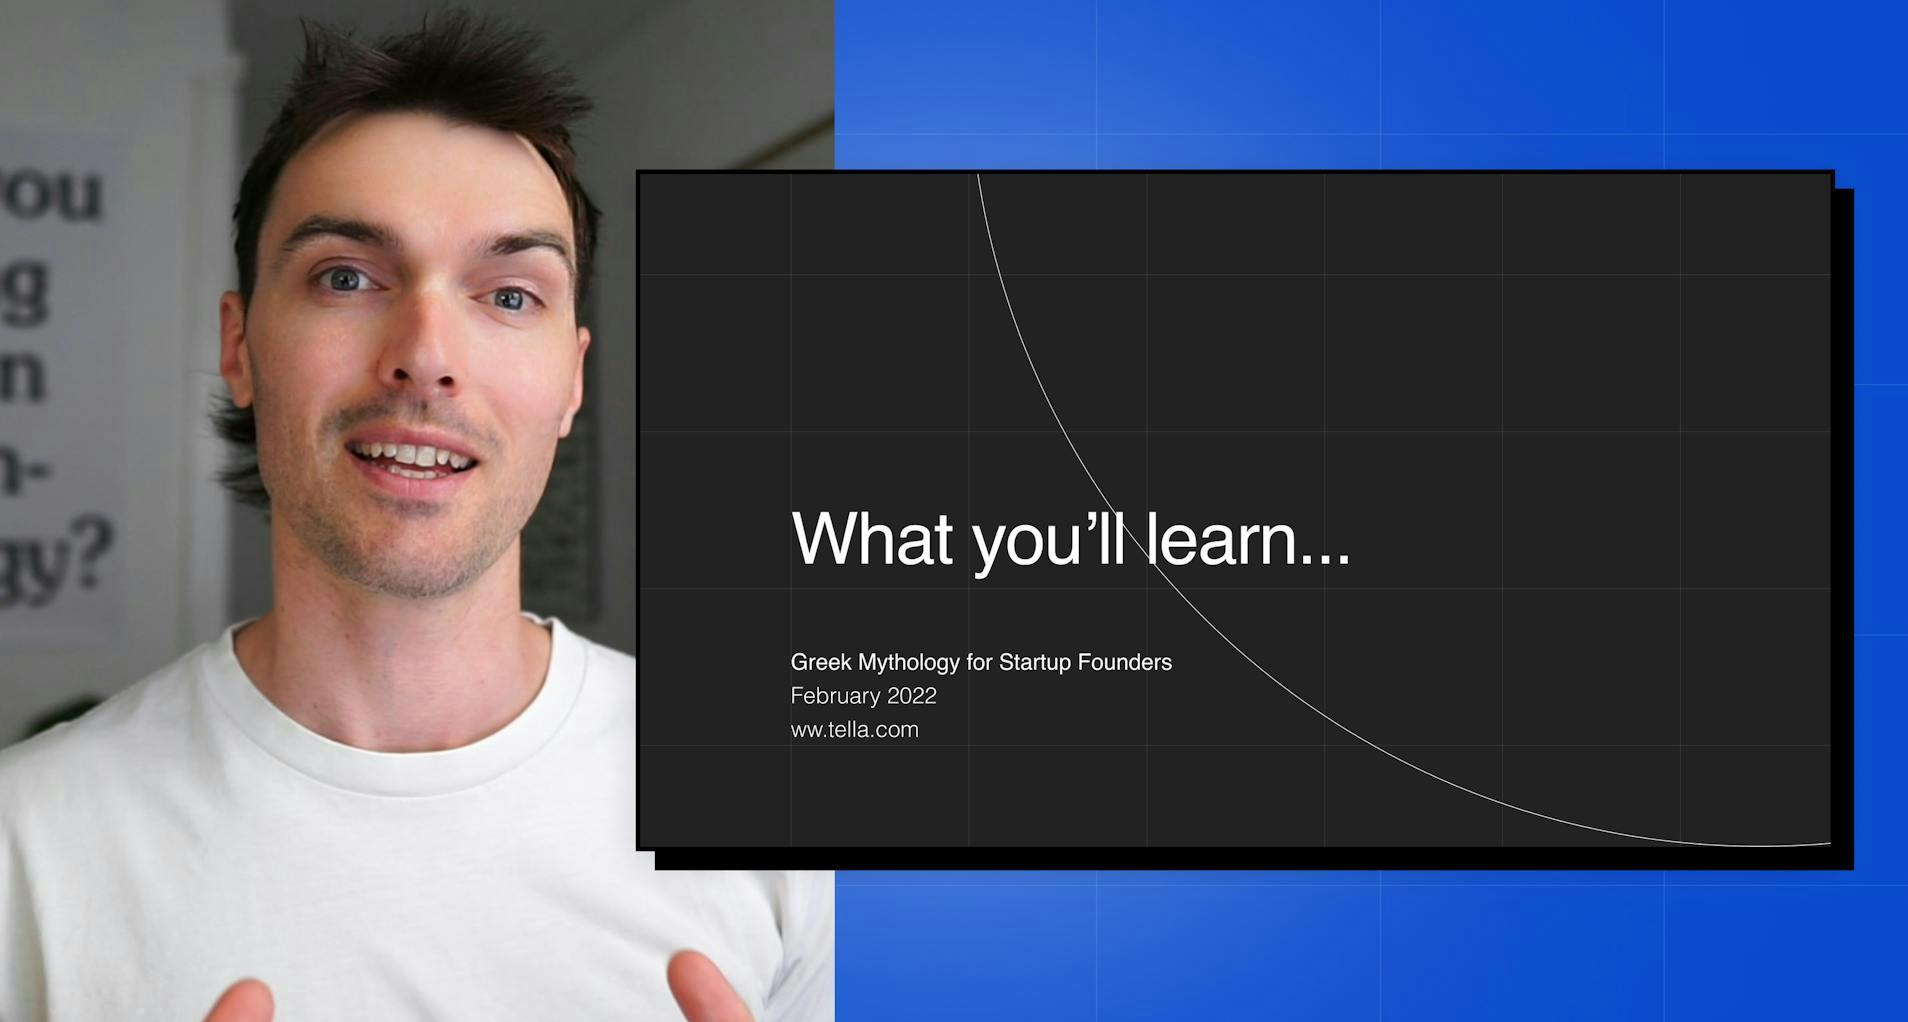 Create internal training course videos for learning and development